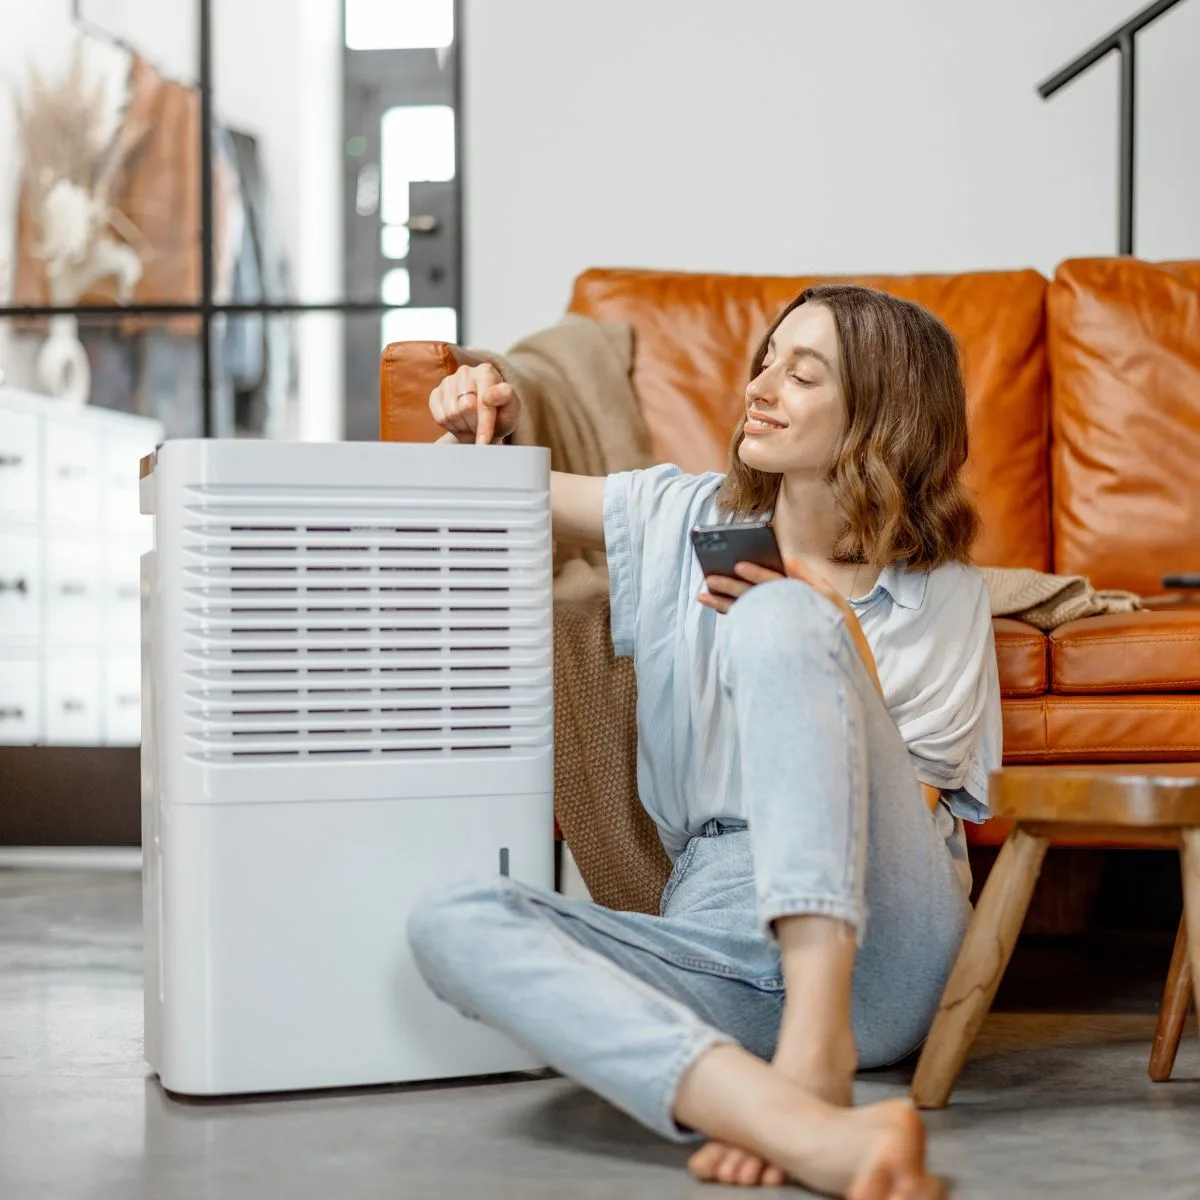 A woman sitting in a living room on the floor next to a dehumidifier.